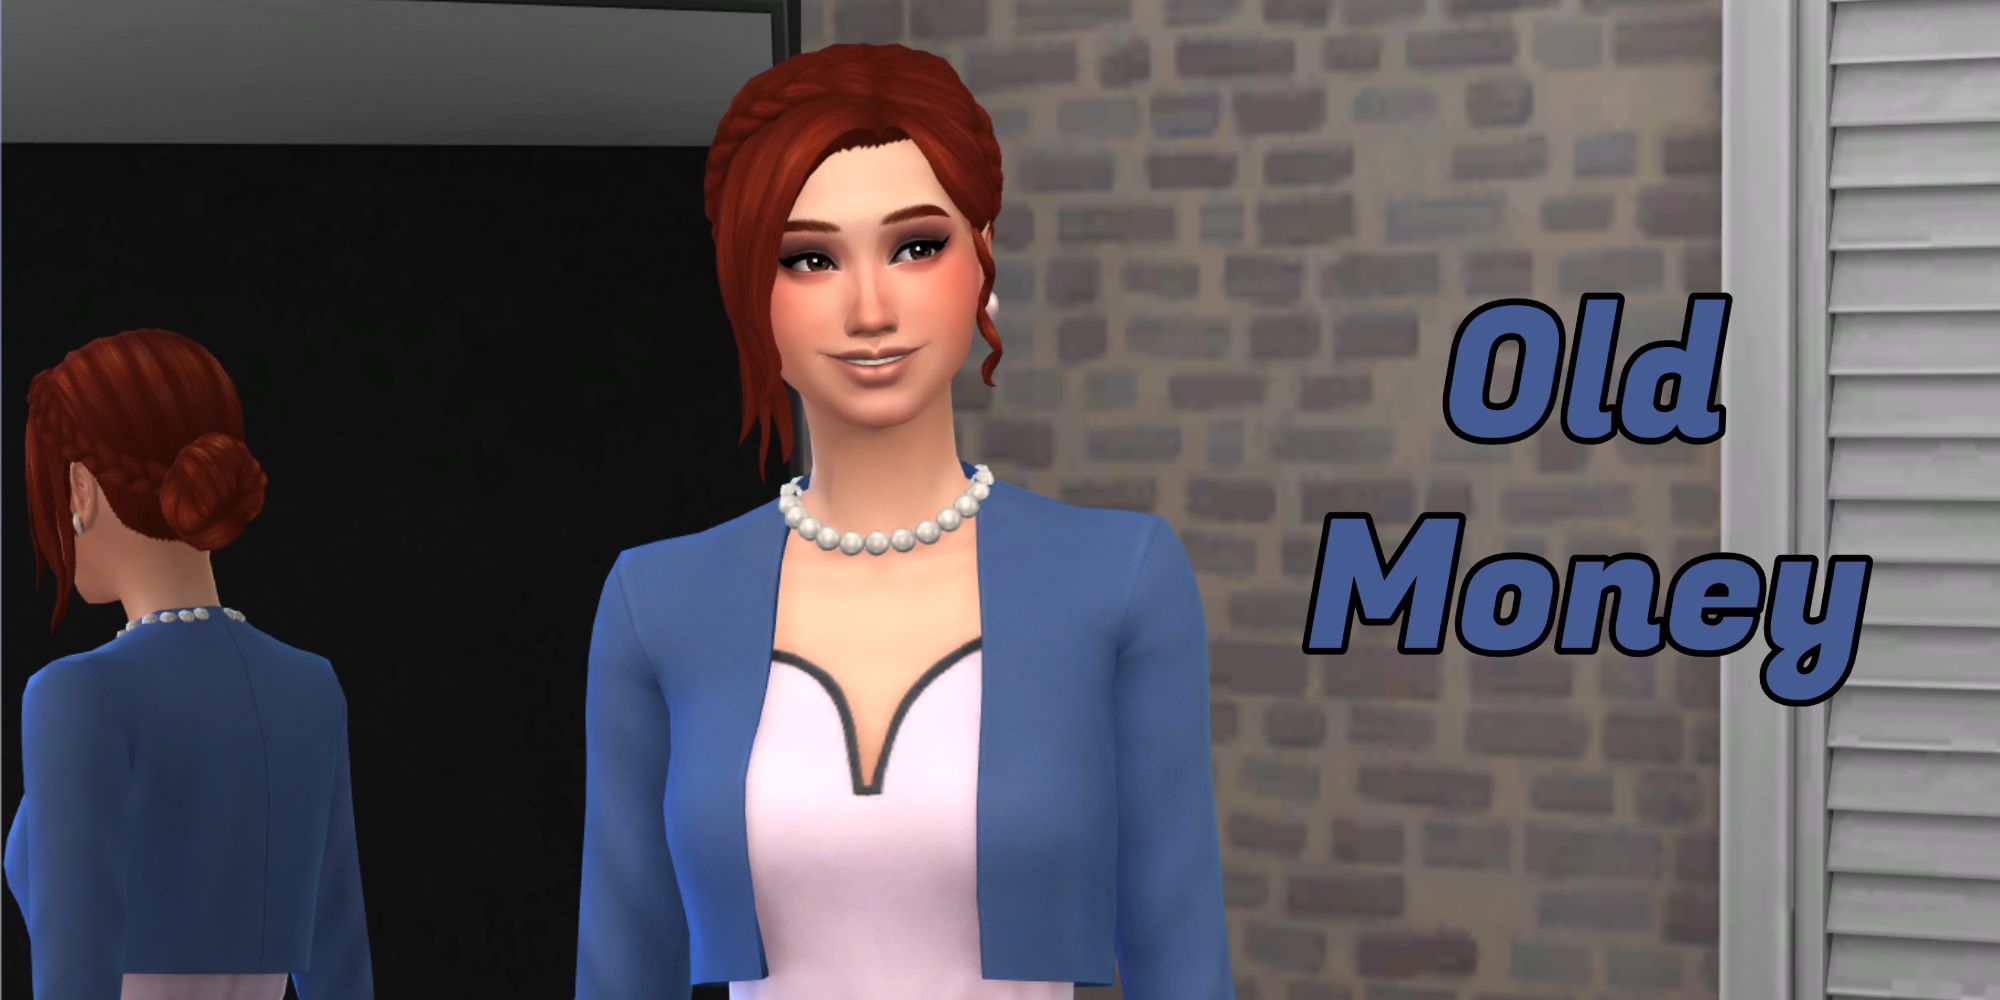 A Sim represents the Old Money generation of the legacy challenge